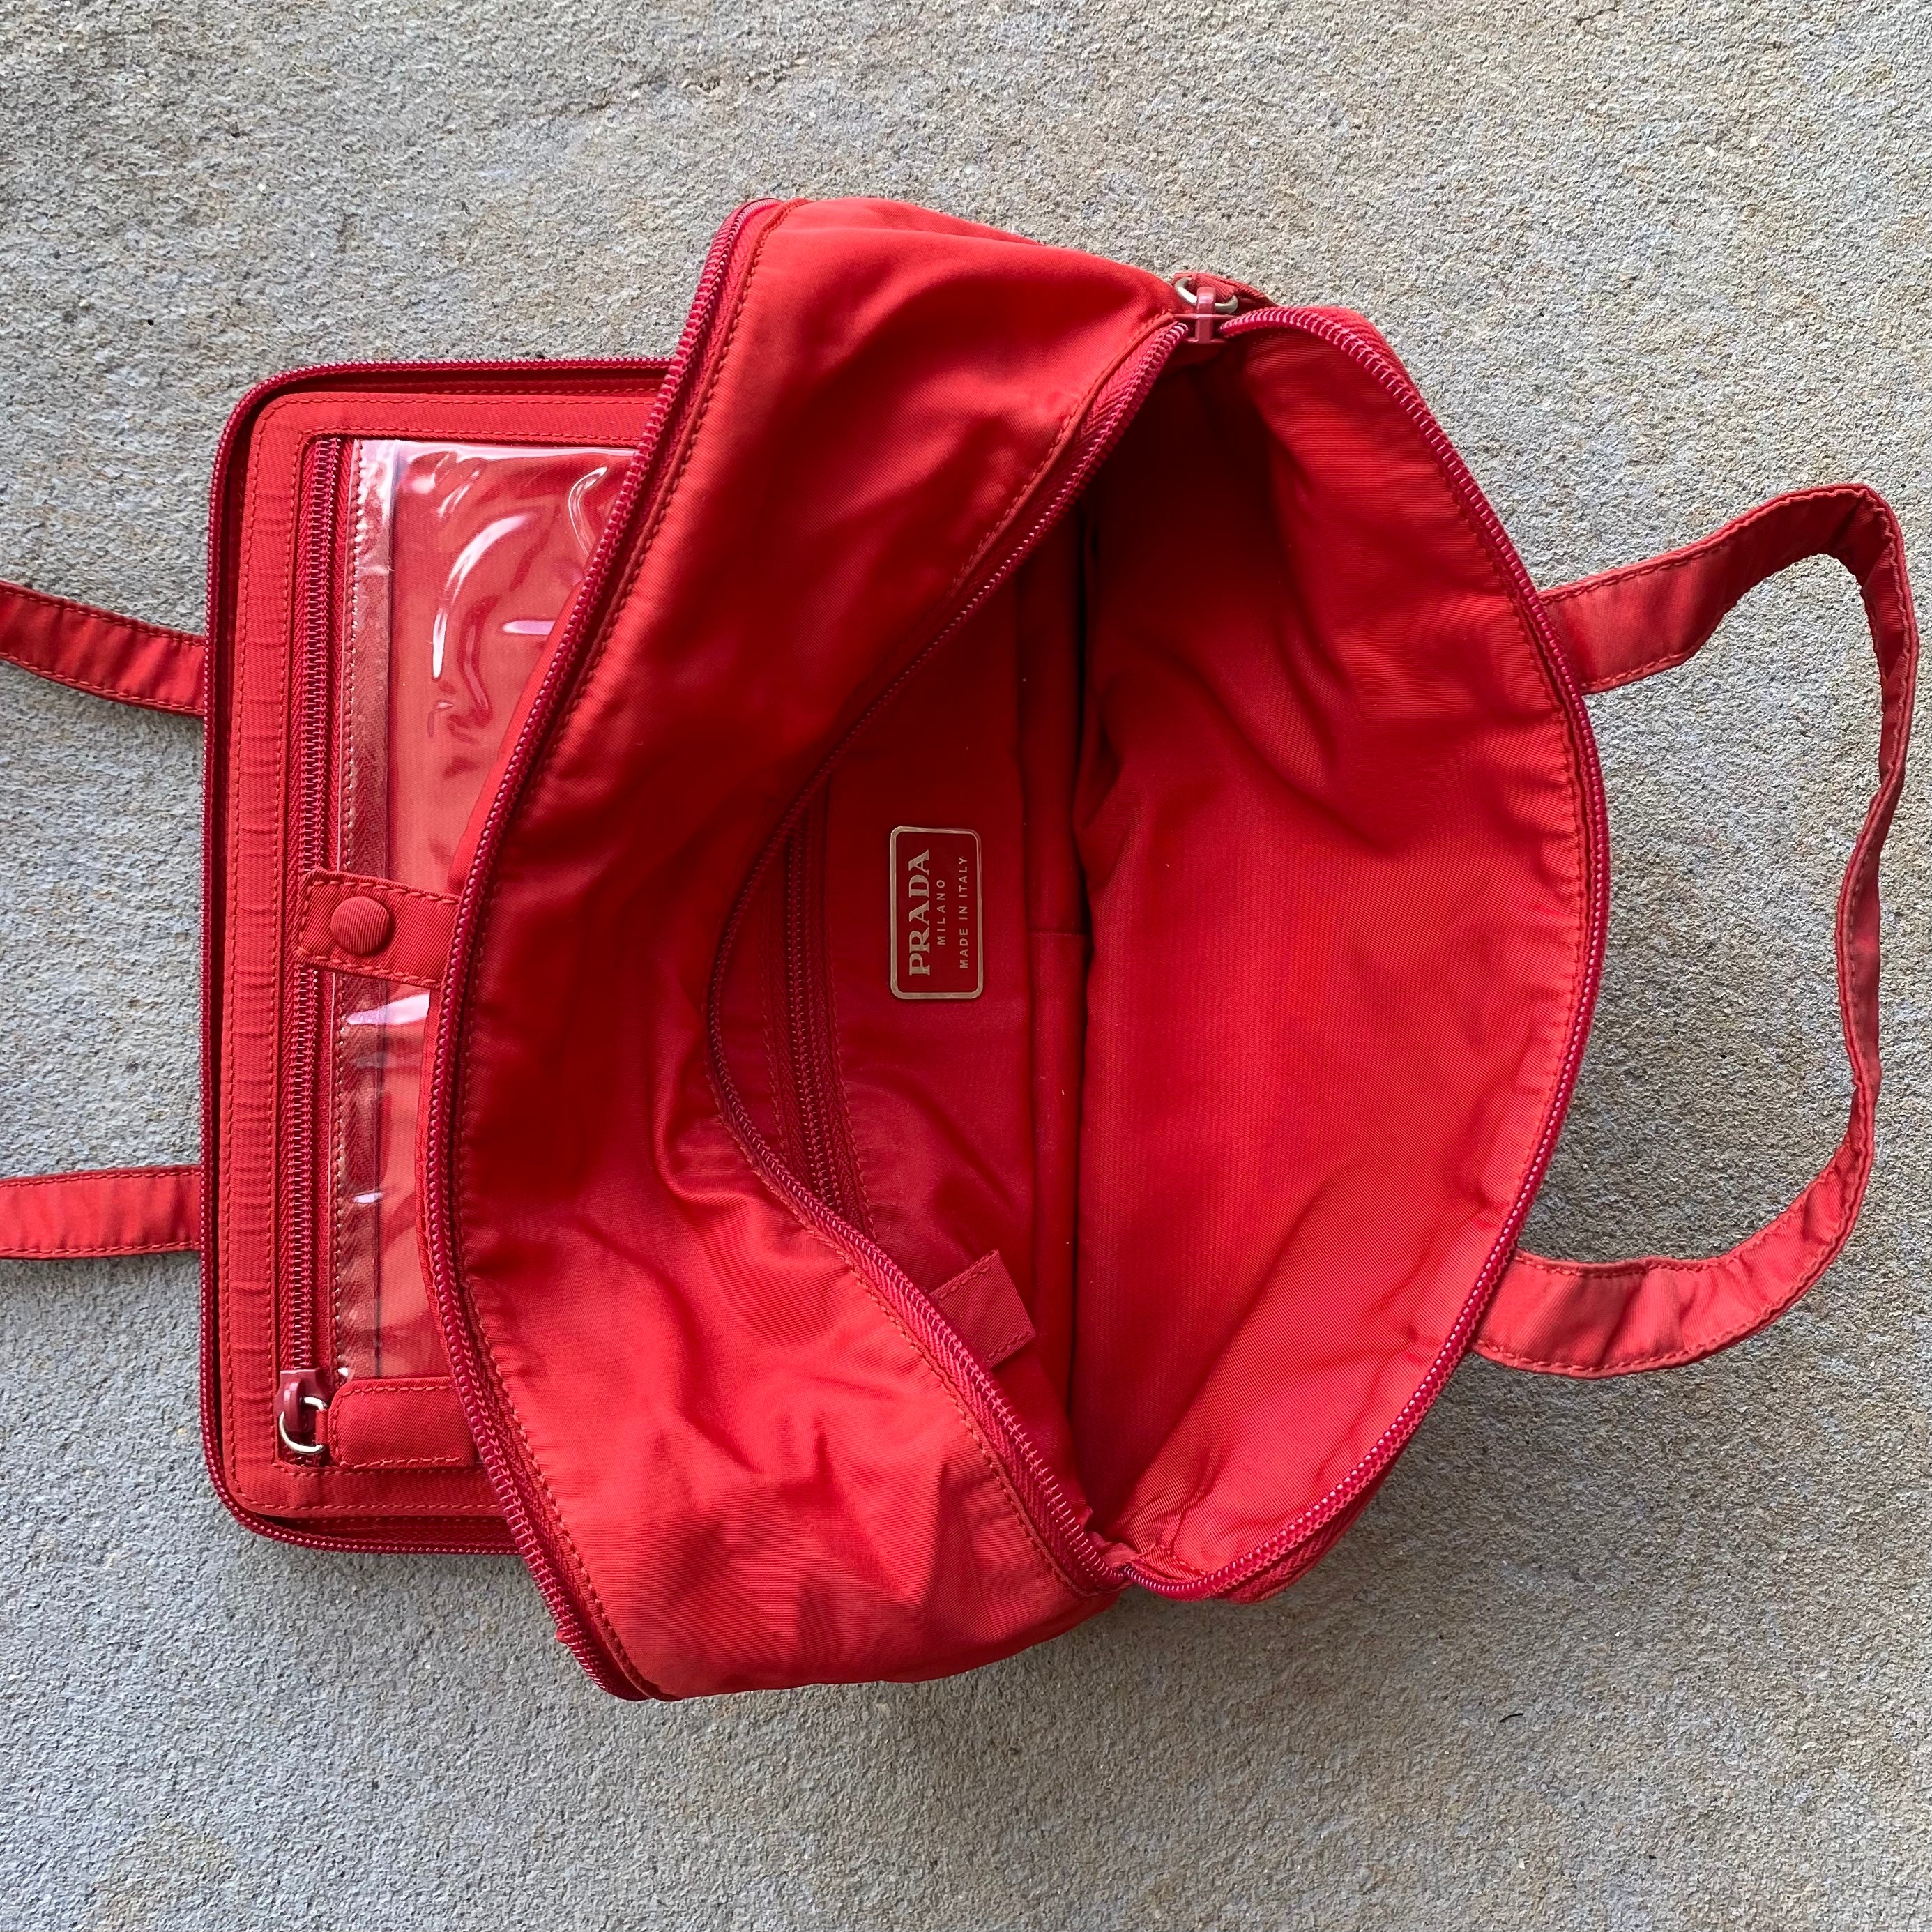 Vintage Prada Nylon Red Multi Compartment Carry / Cosmetic Bag (1997)